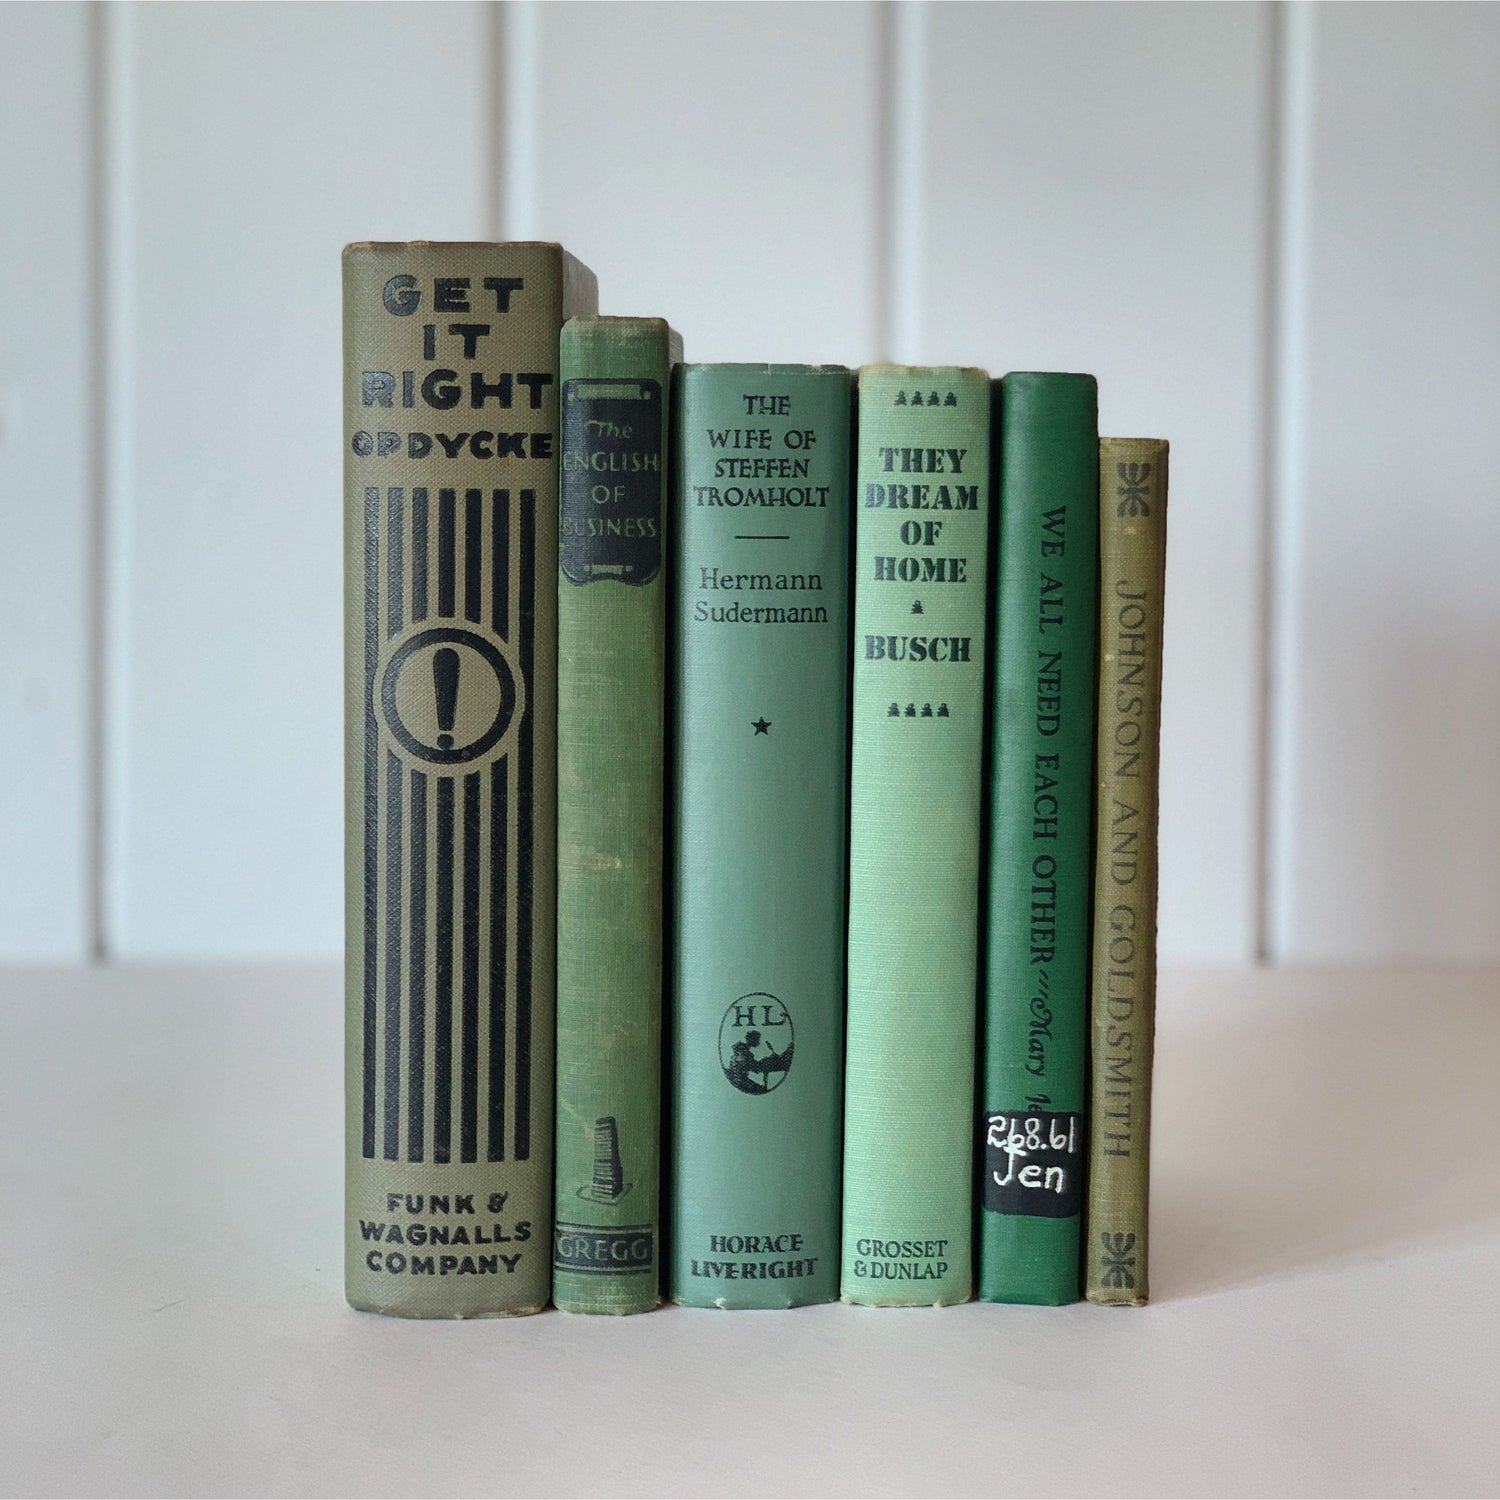 Vintage Green and Black Decorative Books for Display, Farmhouse Decor, Shelf Styling, Books By Color